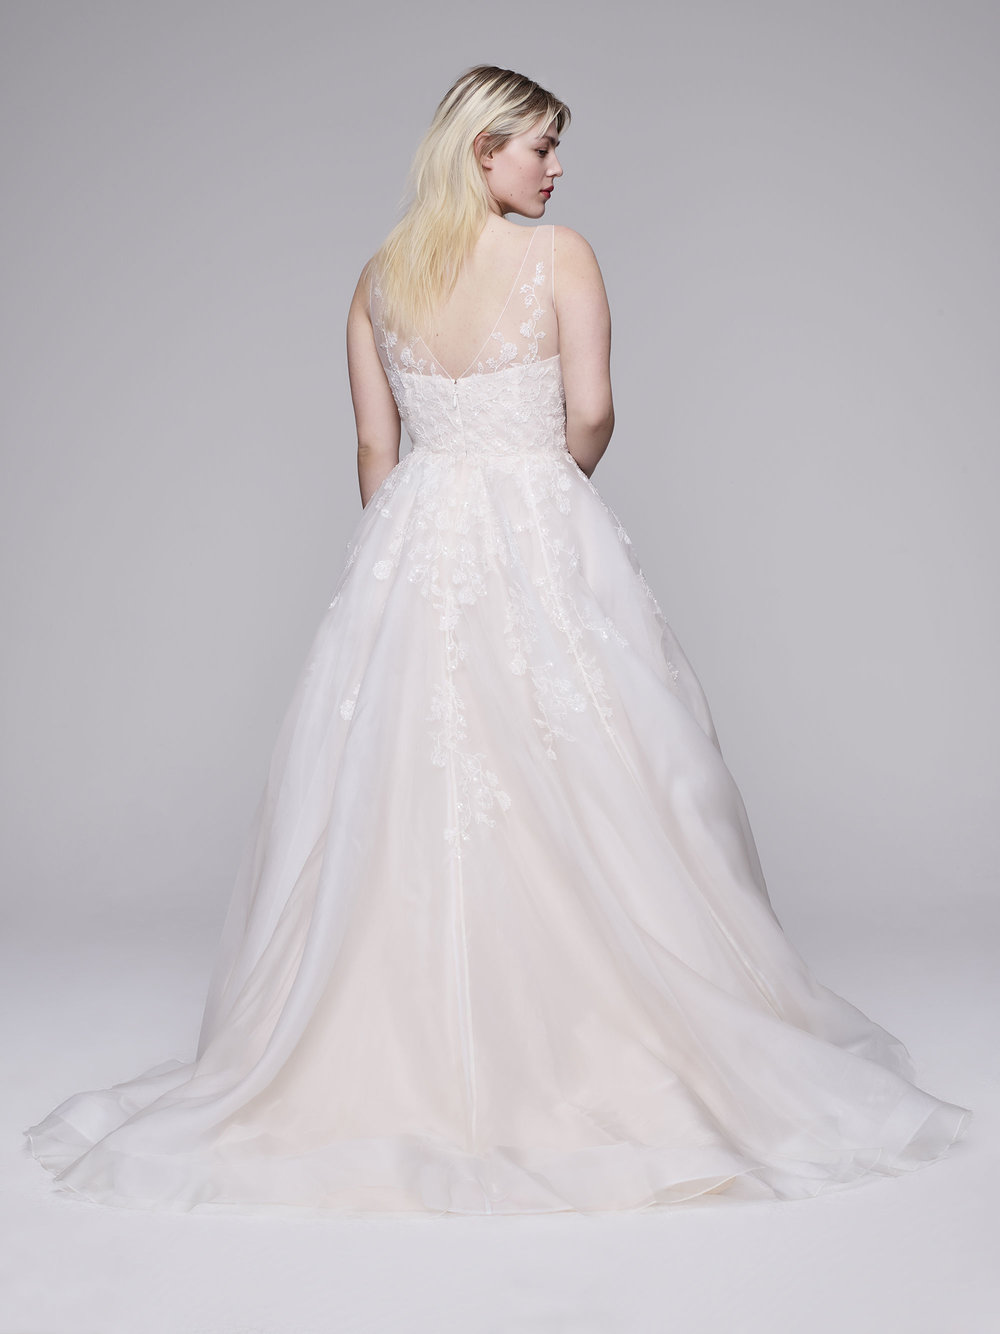 Plus Size Designer Wedding Gowns from Curve Couture by Anne Barge